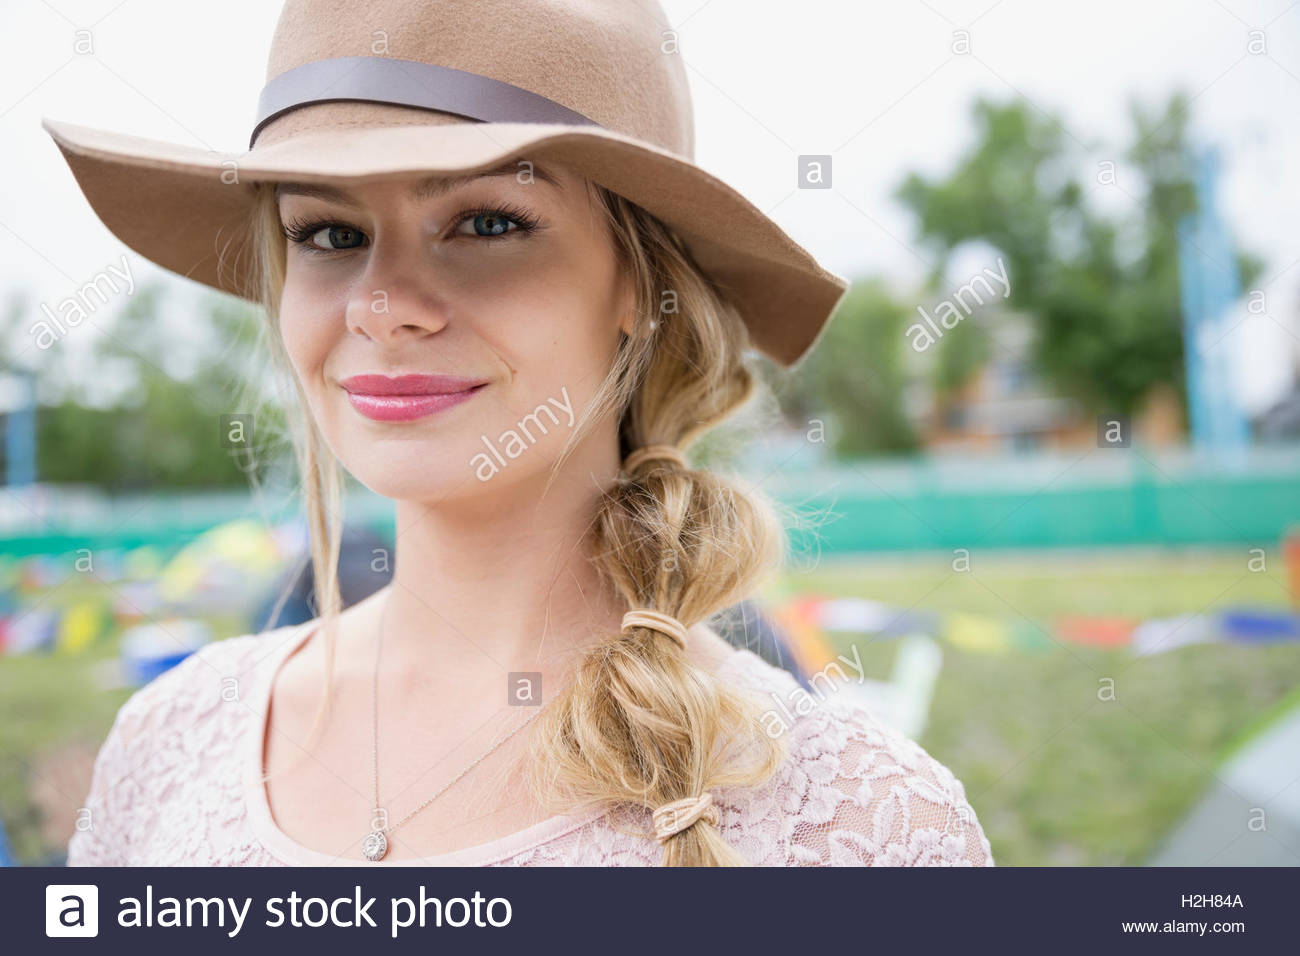 Unrecognisable caucasian blonde woman wearing white hat and beige